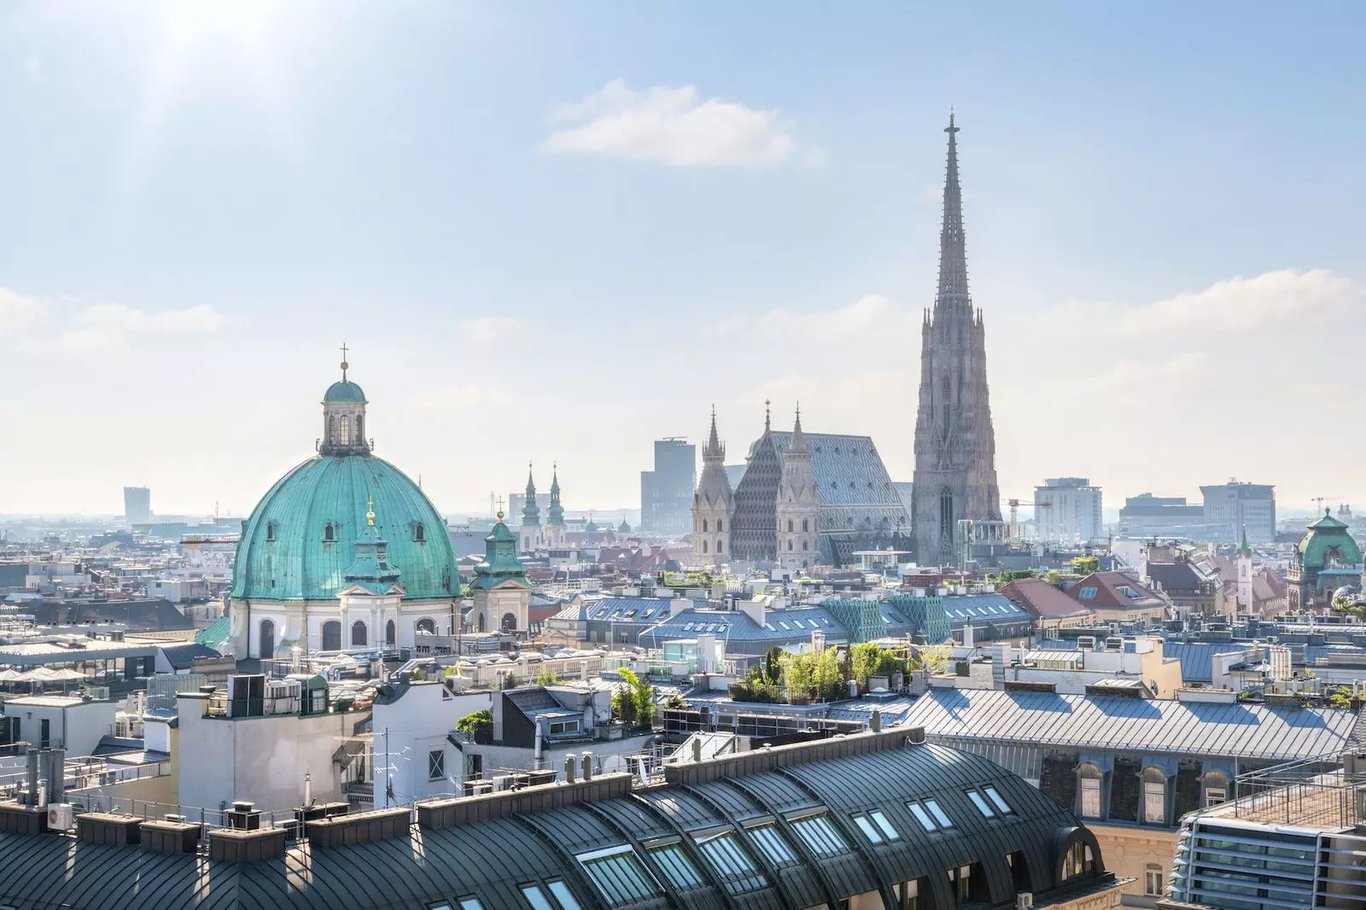 Vienna Top 20 Attractions - You shouldn’t miss...